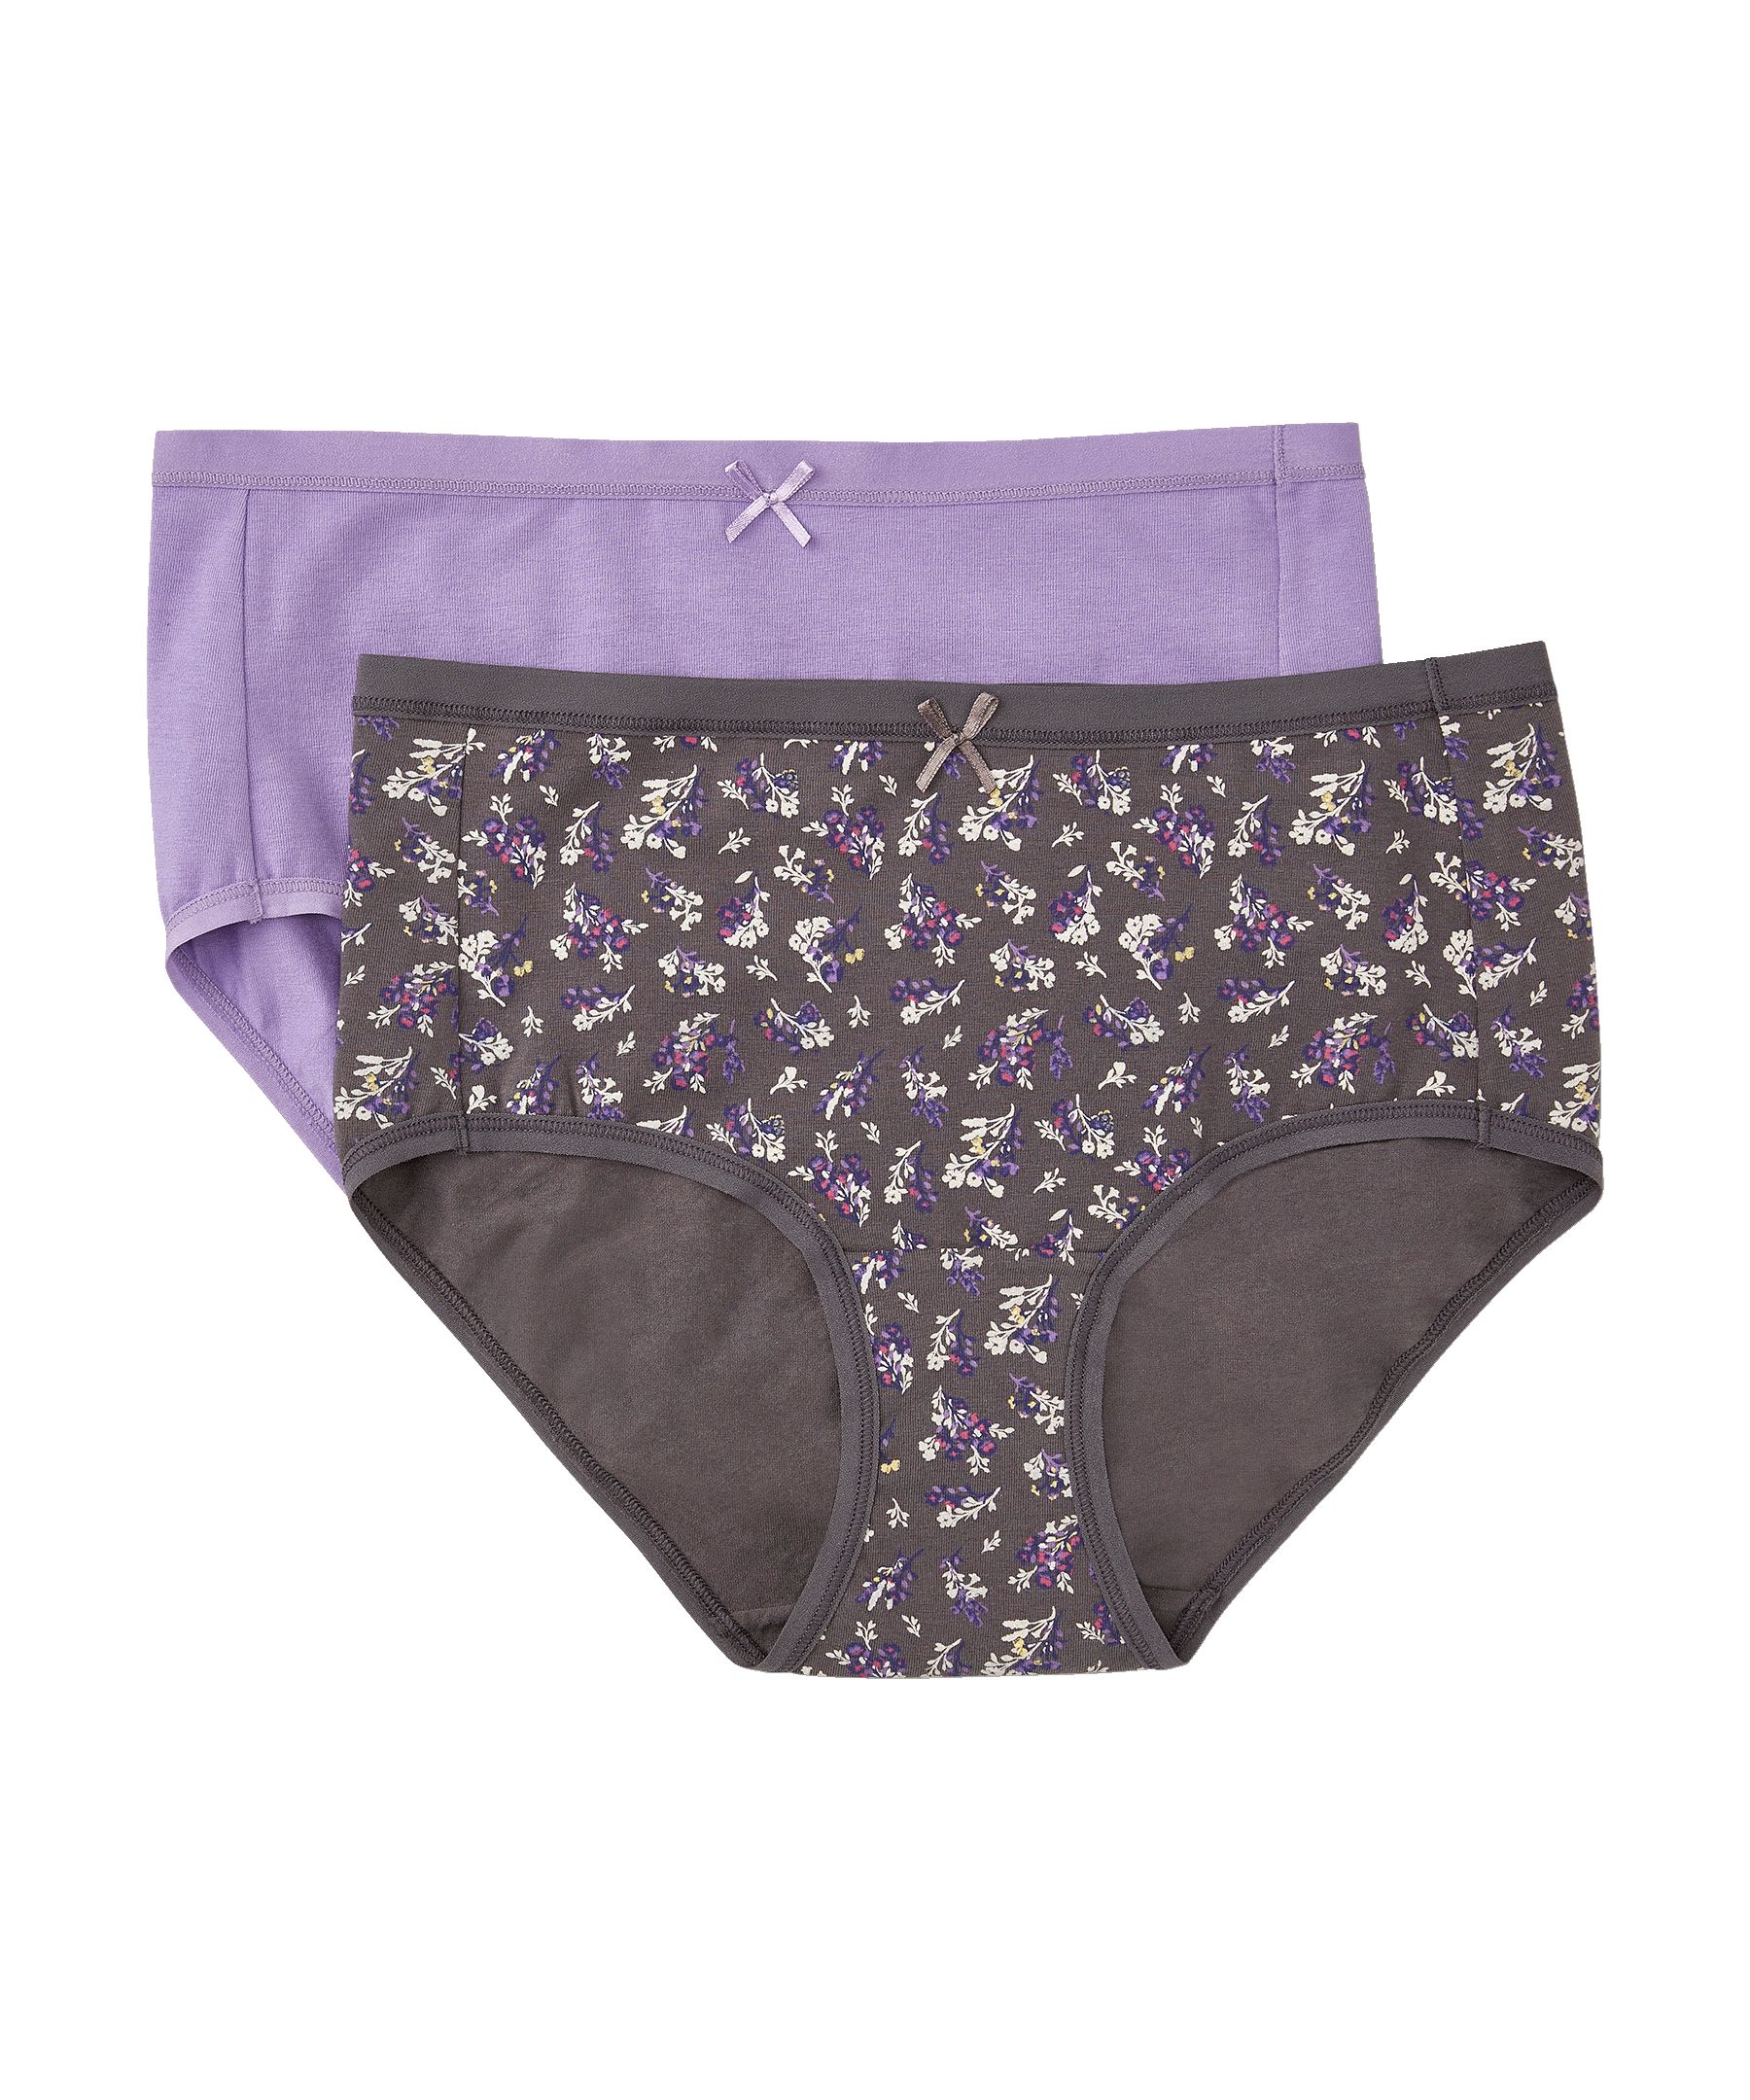 Jockey Women's Worry Free Cotton Briefs for Bladder Leaks and Period  Protection